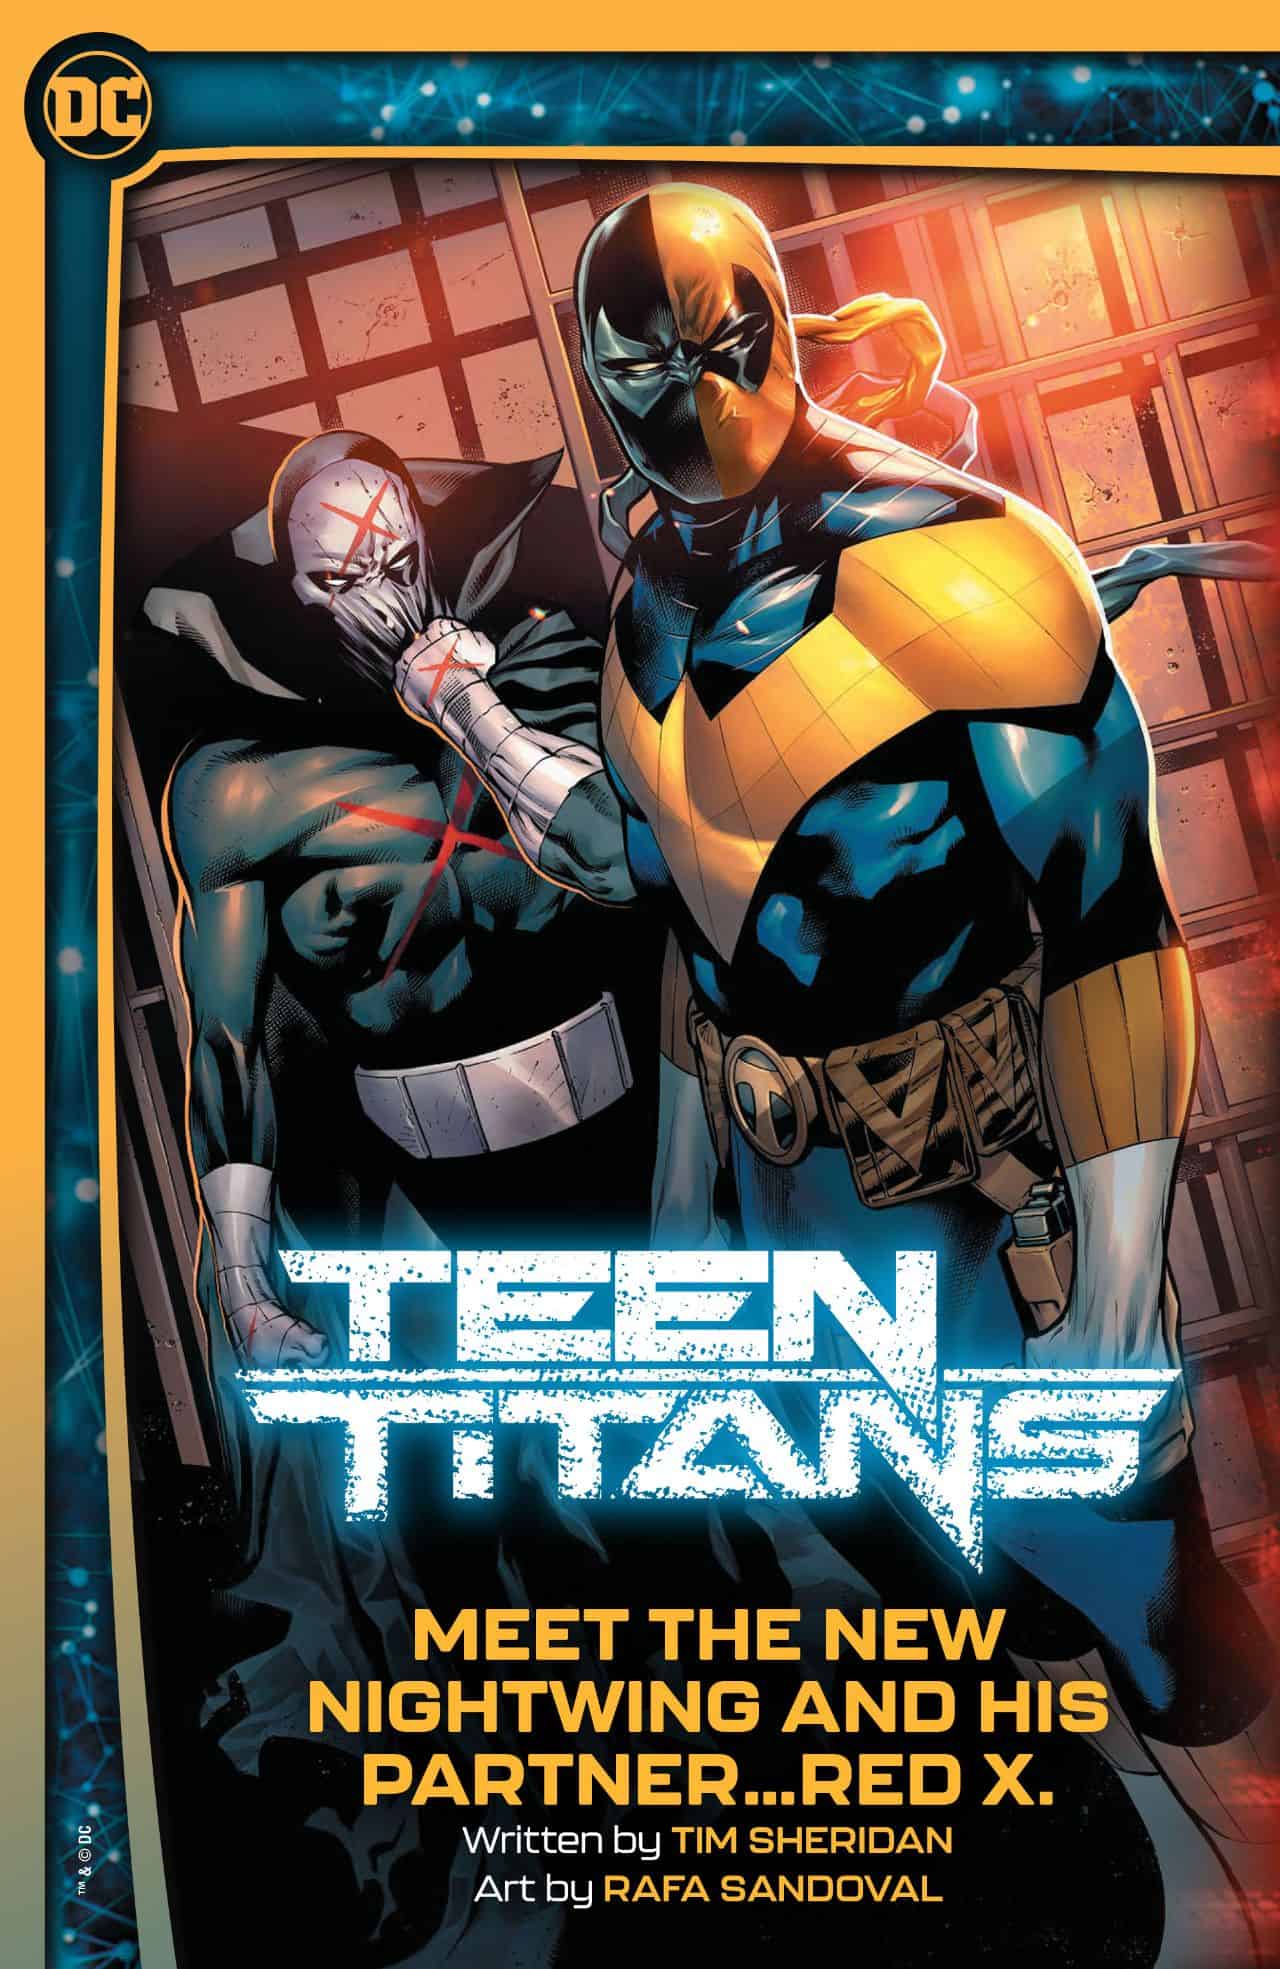 DC Titans on X: the ghouls and guardians of gotham #DCTitans   / X